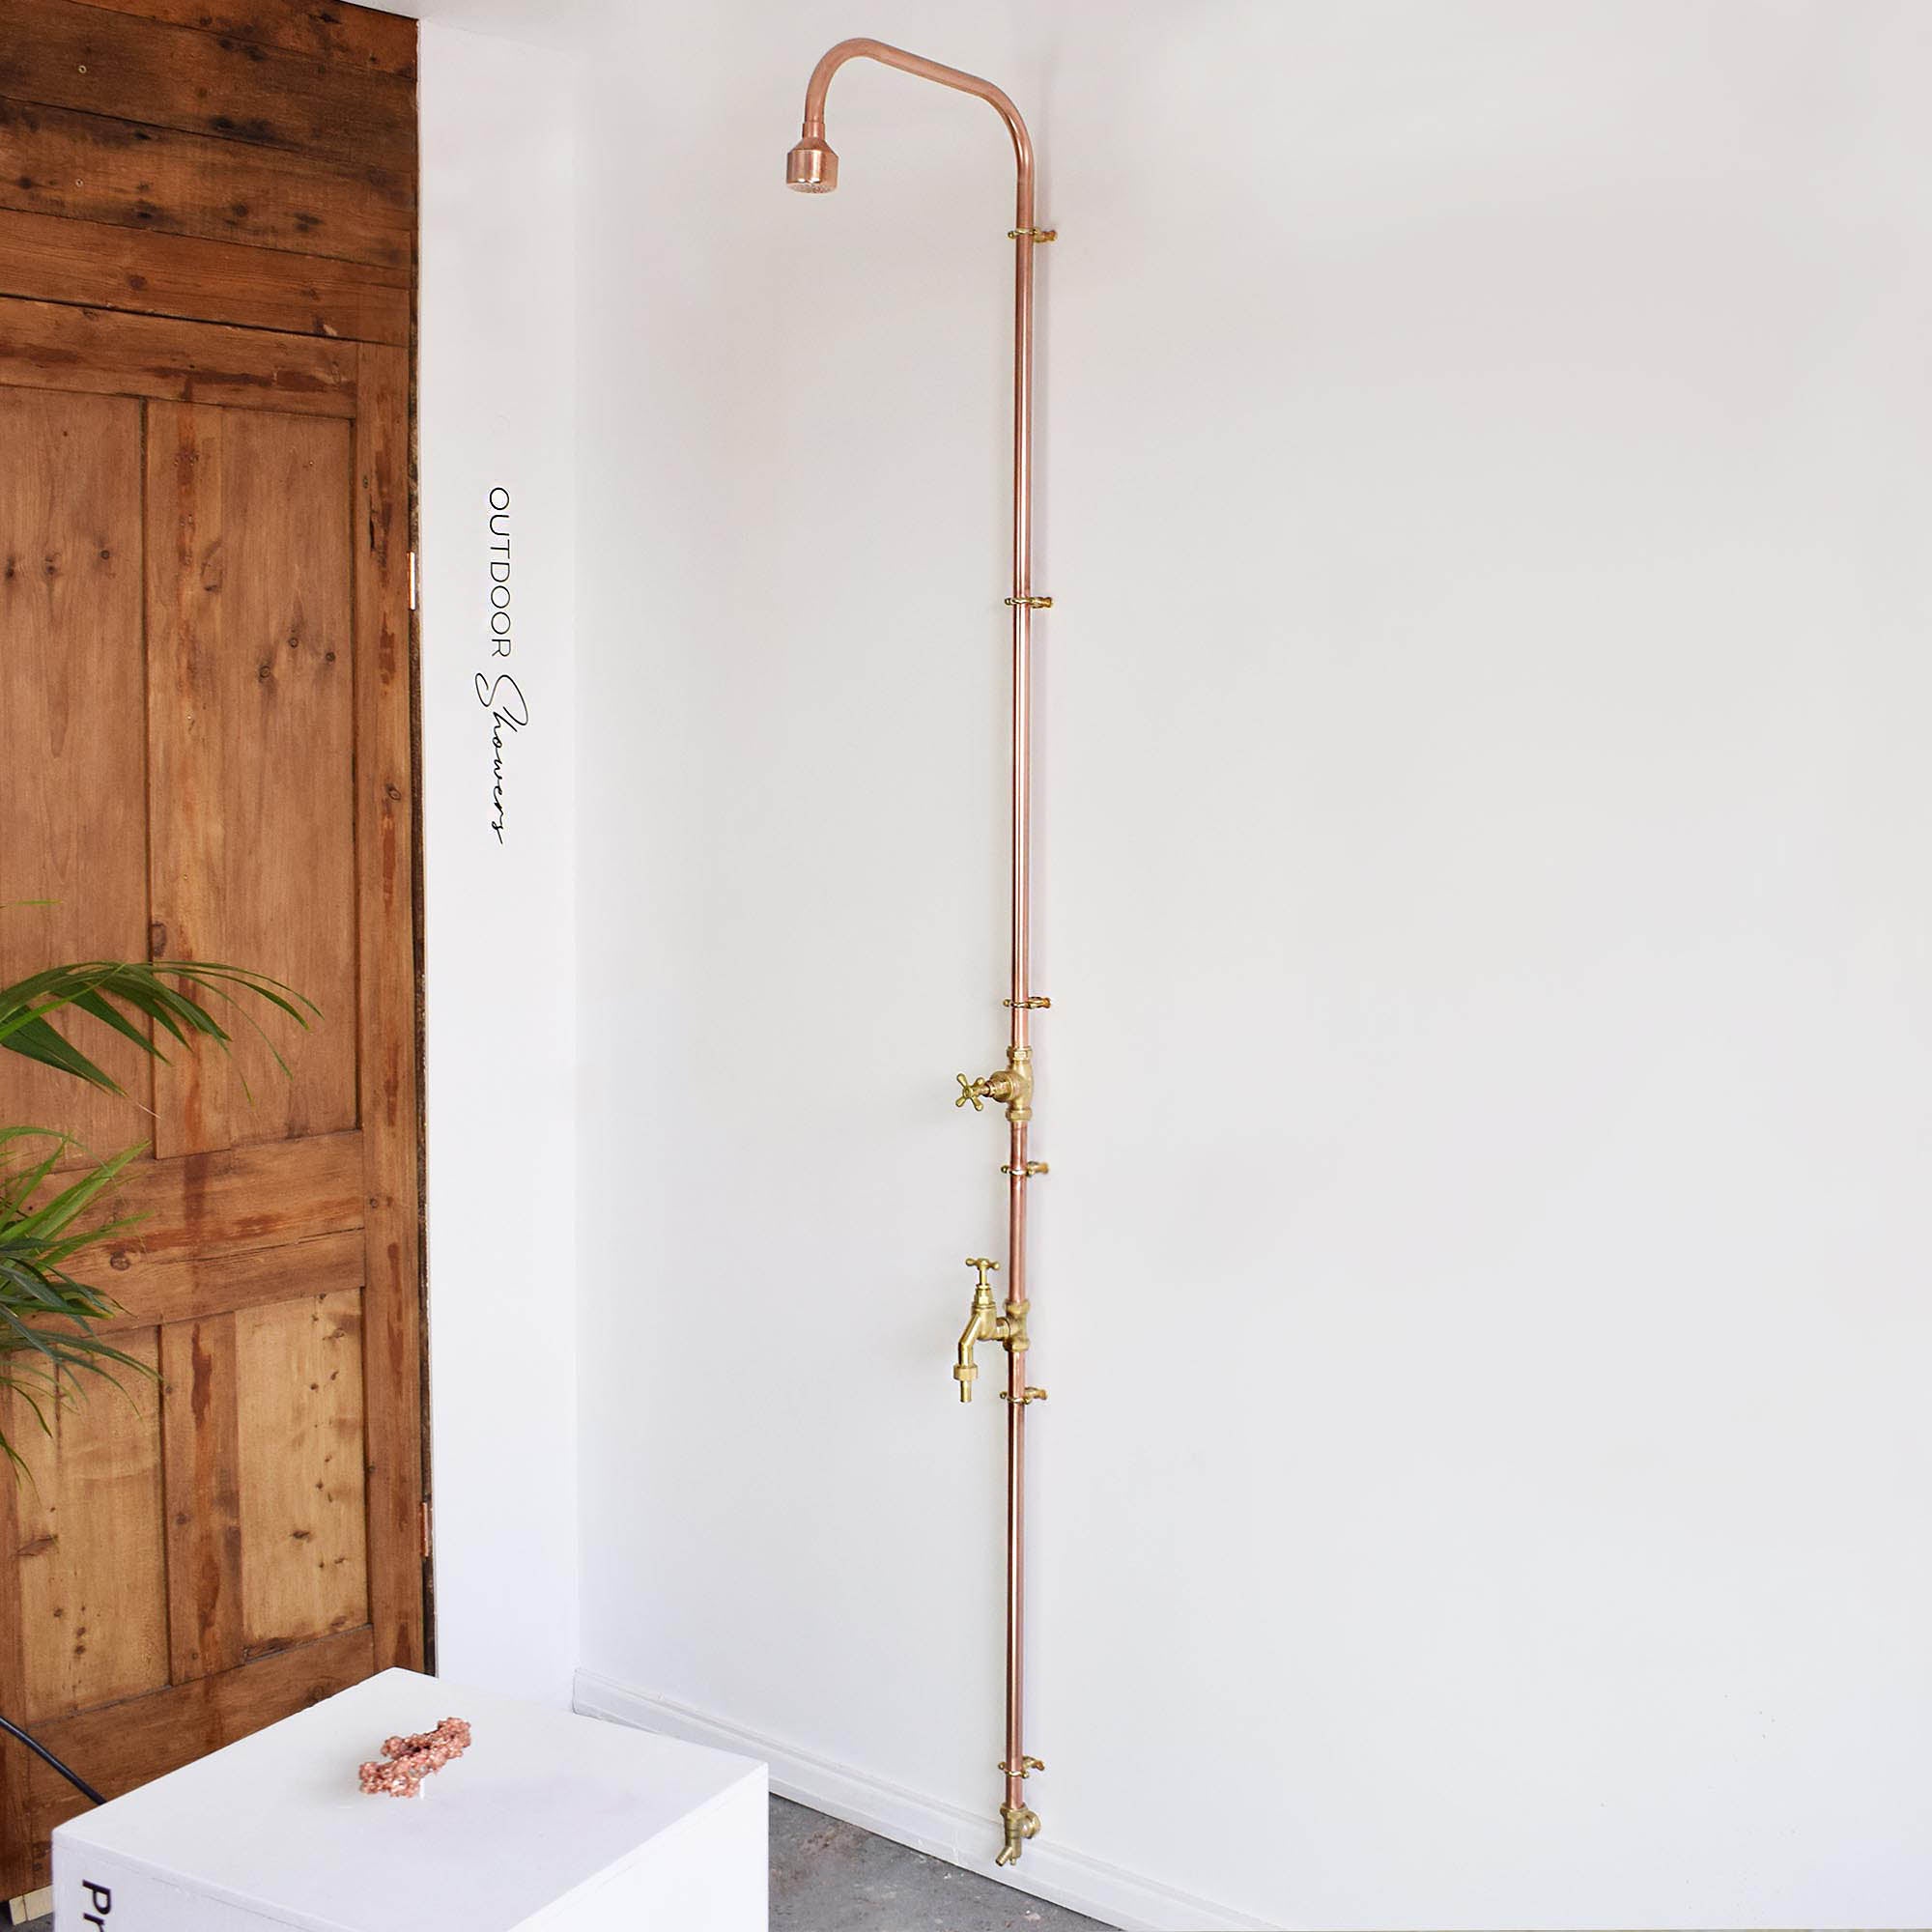 outdoor shower designs manufactured from genuine metal designed to last for years to come by Proper Copper Design